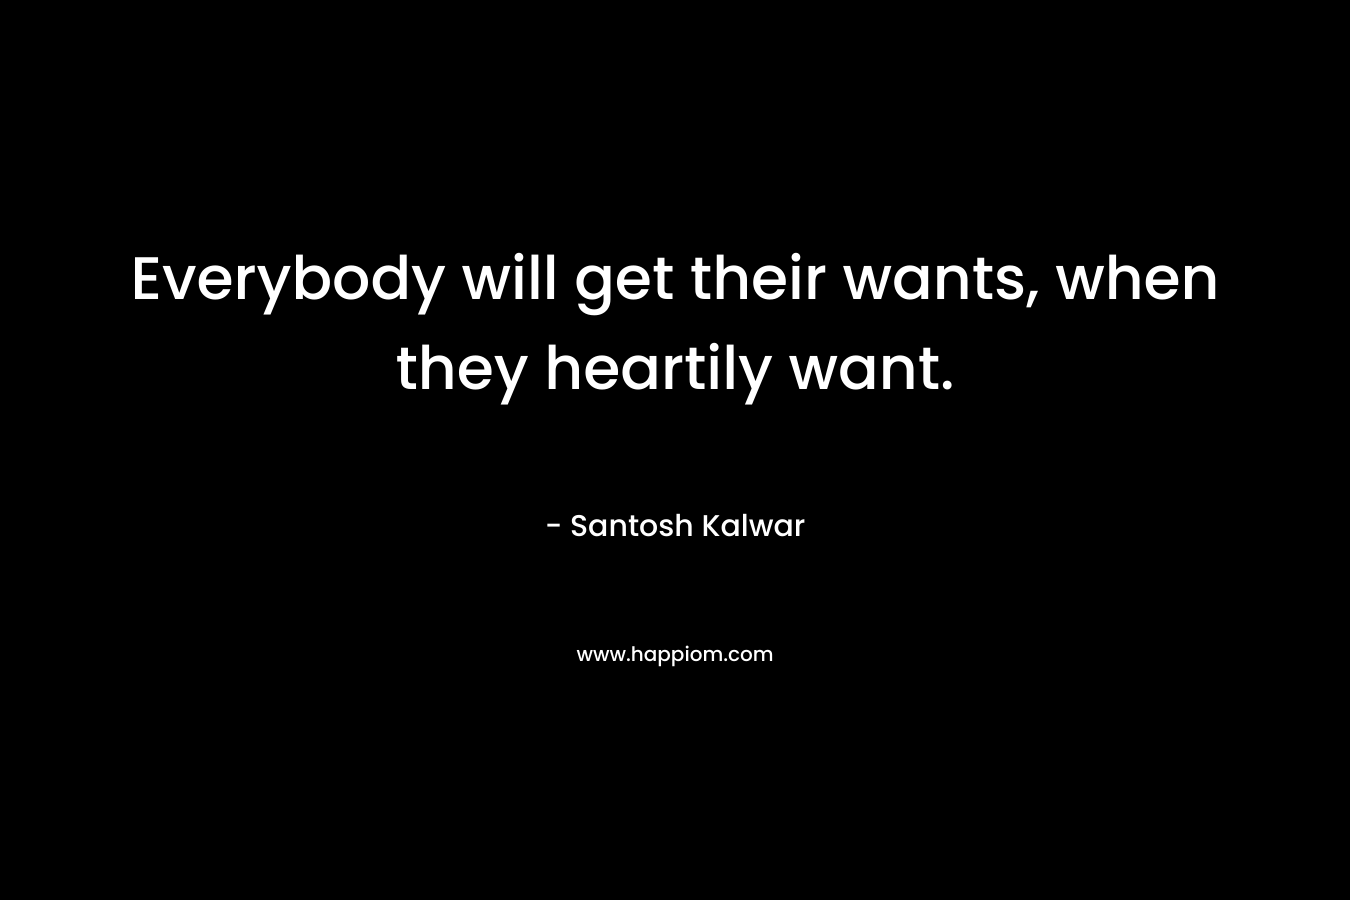 Everybody will get their wants, when they heartily want.